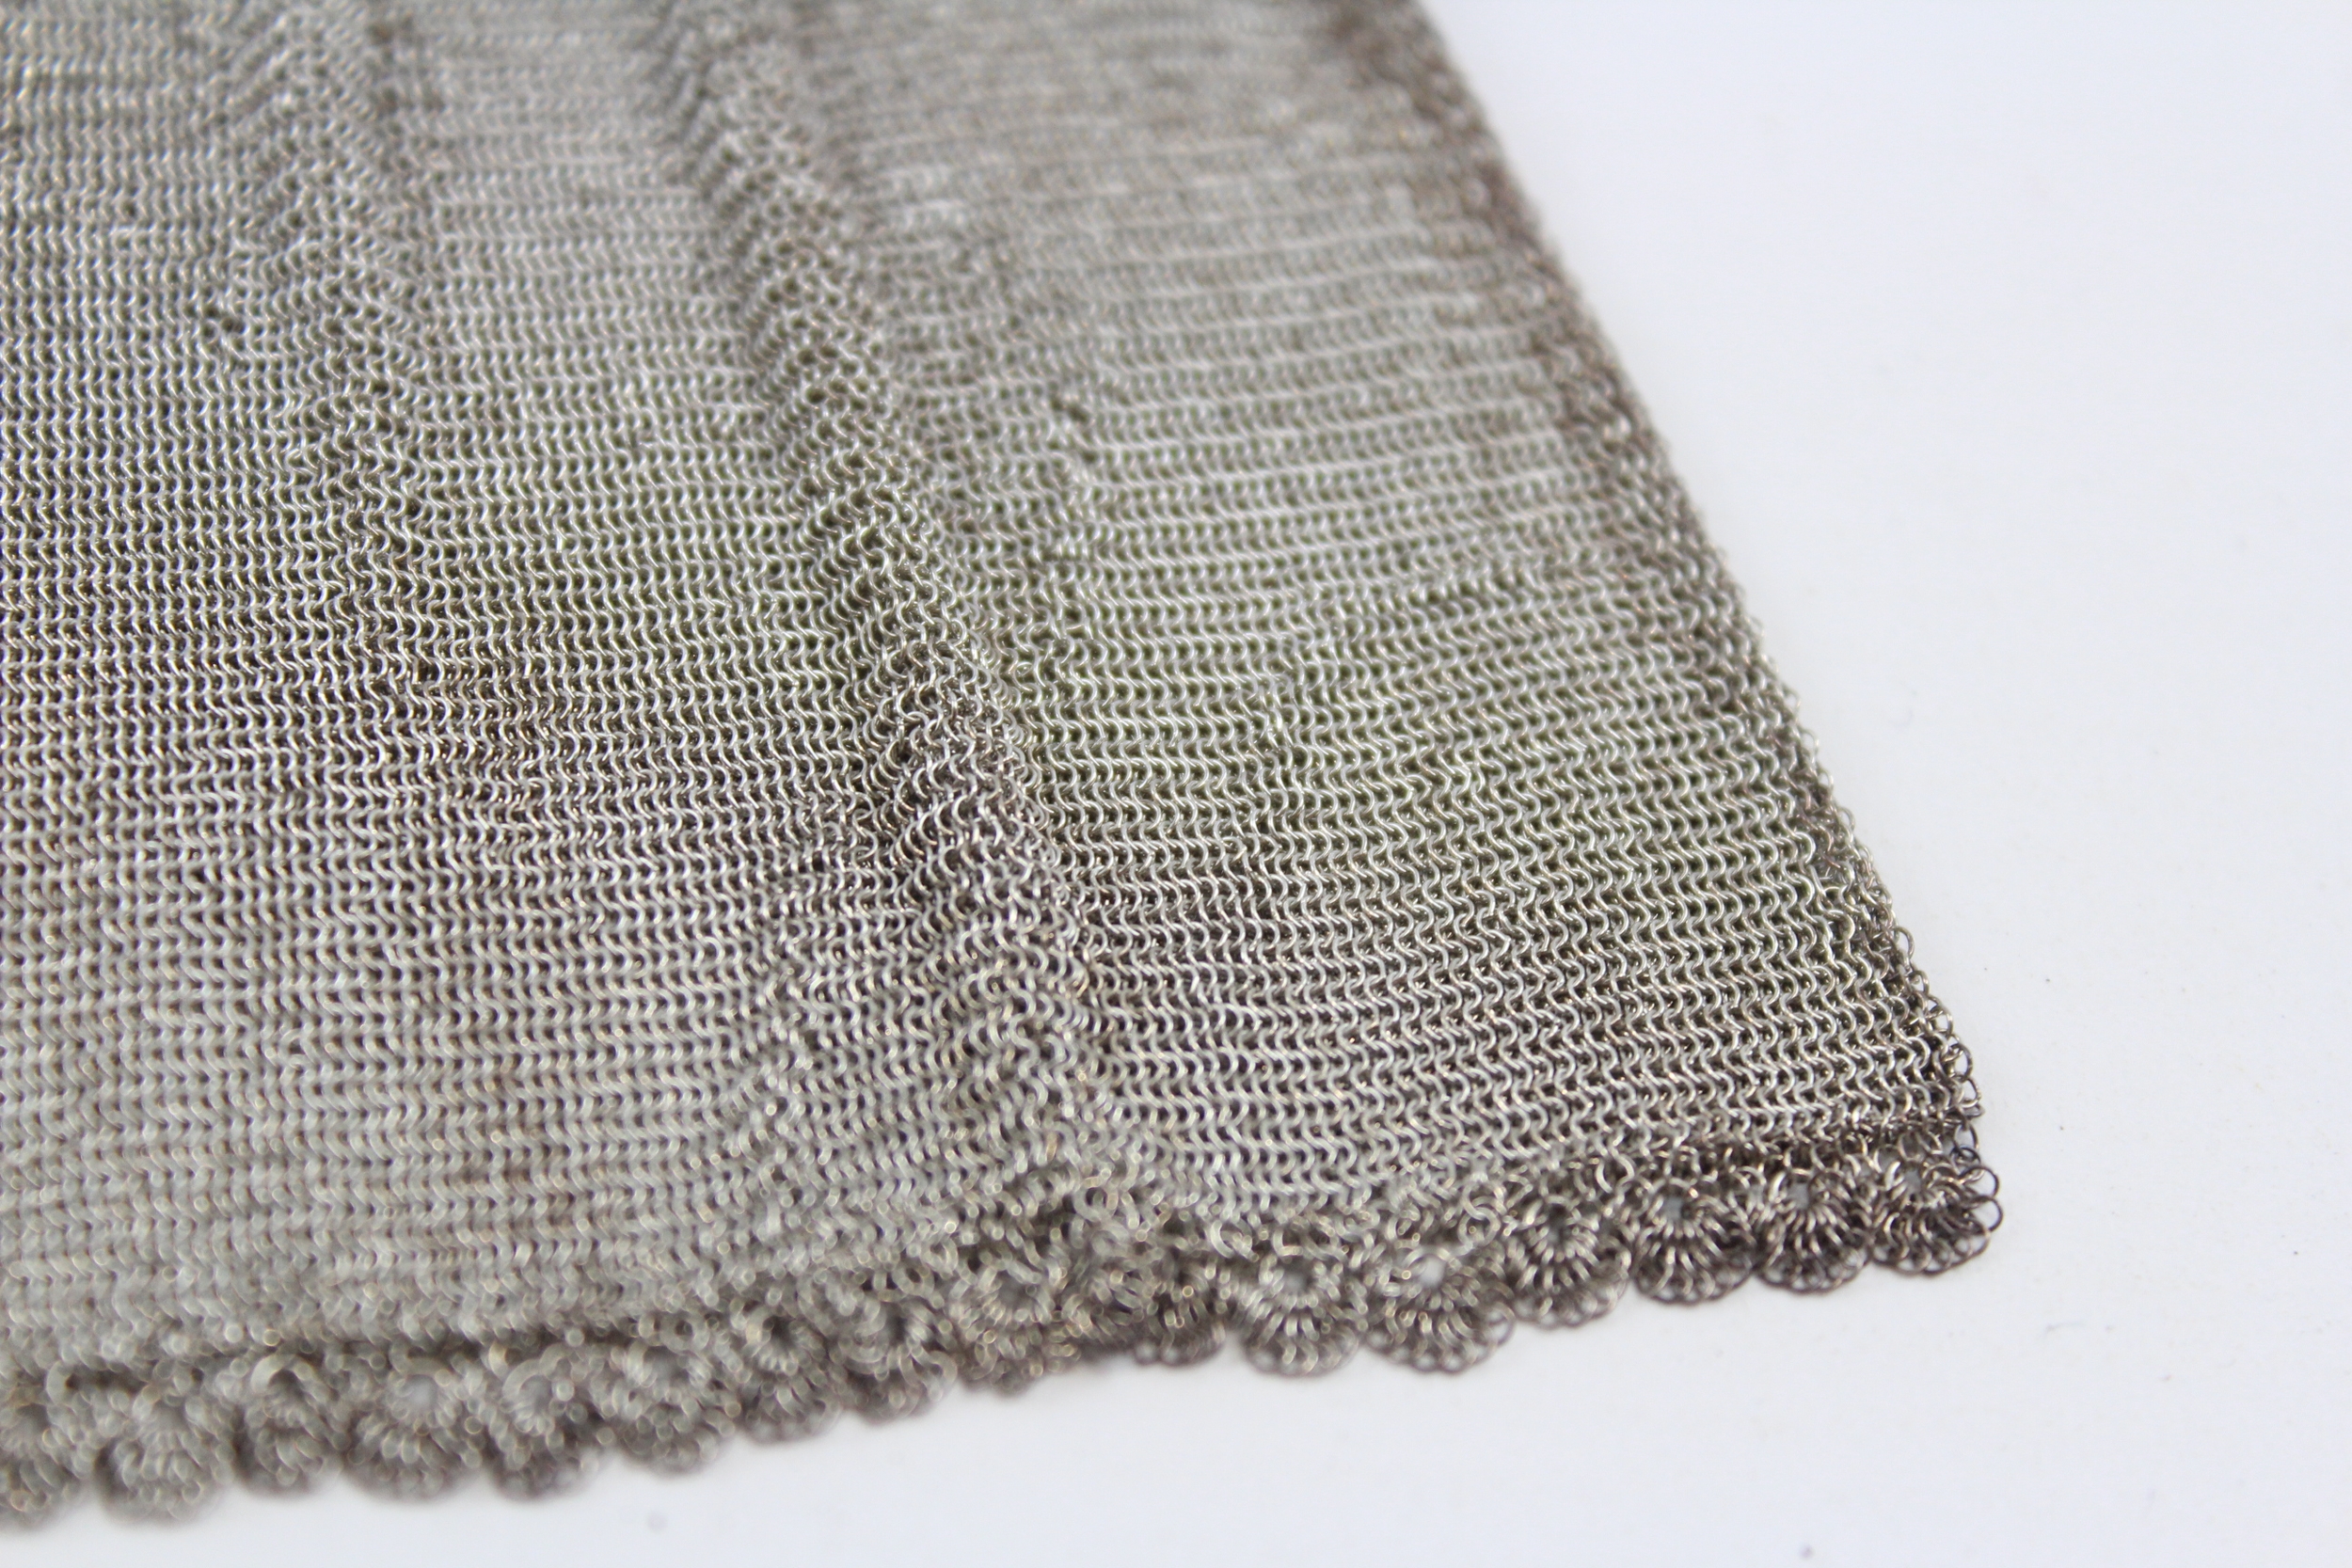 A silver mesh purse, London import 1927, 11 x 10cm, 78gm - Image 5 of 7